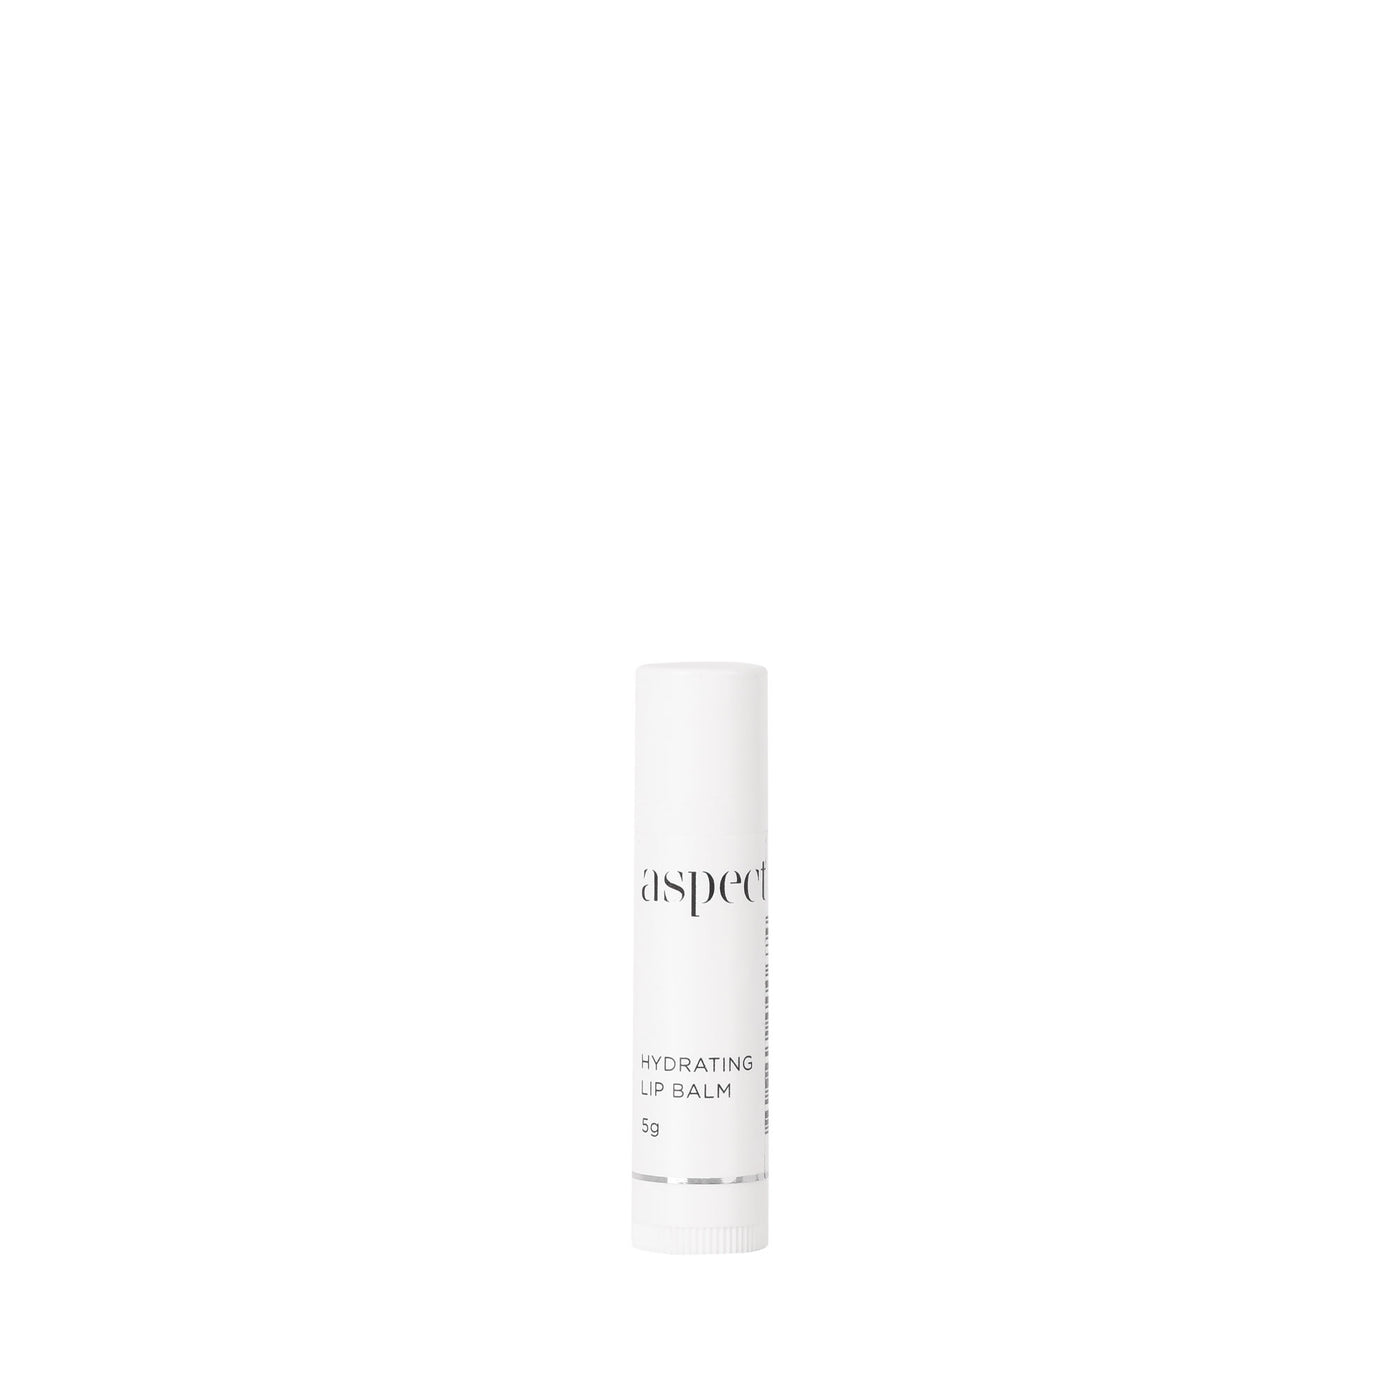 Aspect Hydrating Lip Balm - Exquisite Laser Clinic 